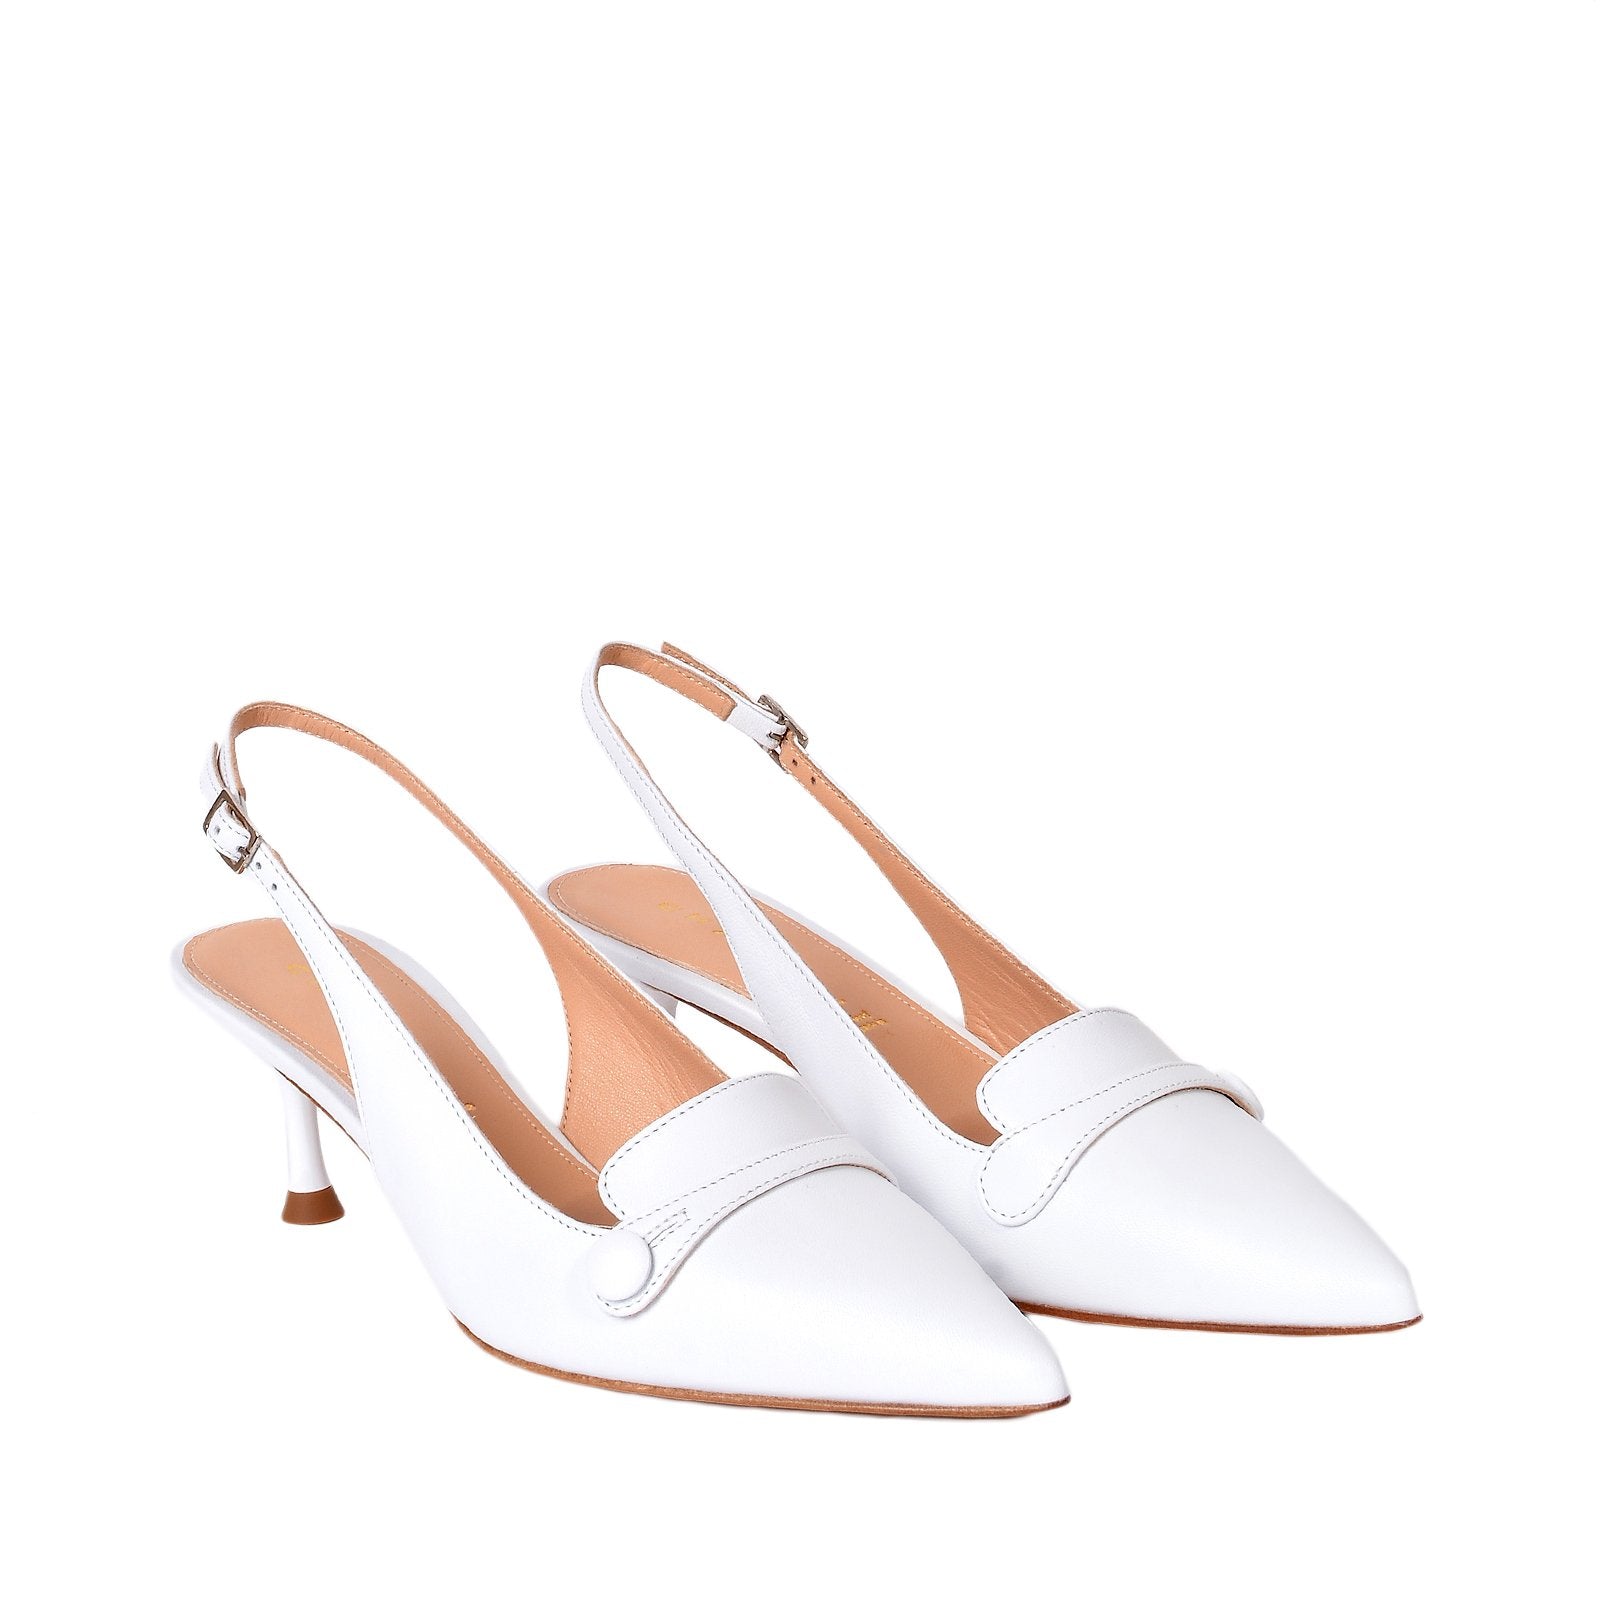 Capretto Sling Back Shoes In White Heels 1002/White - 3